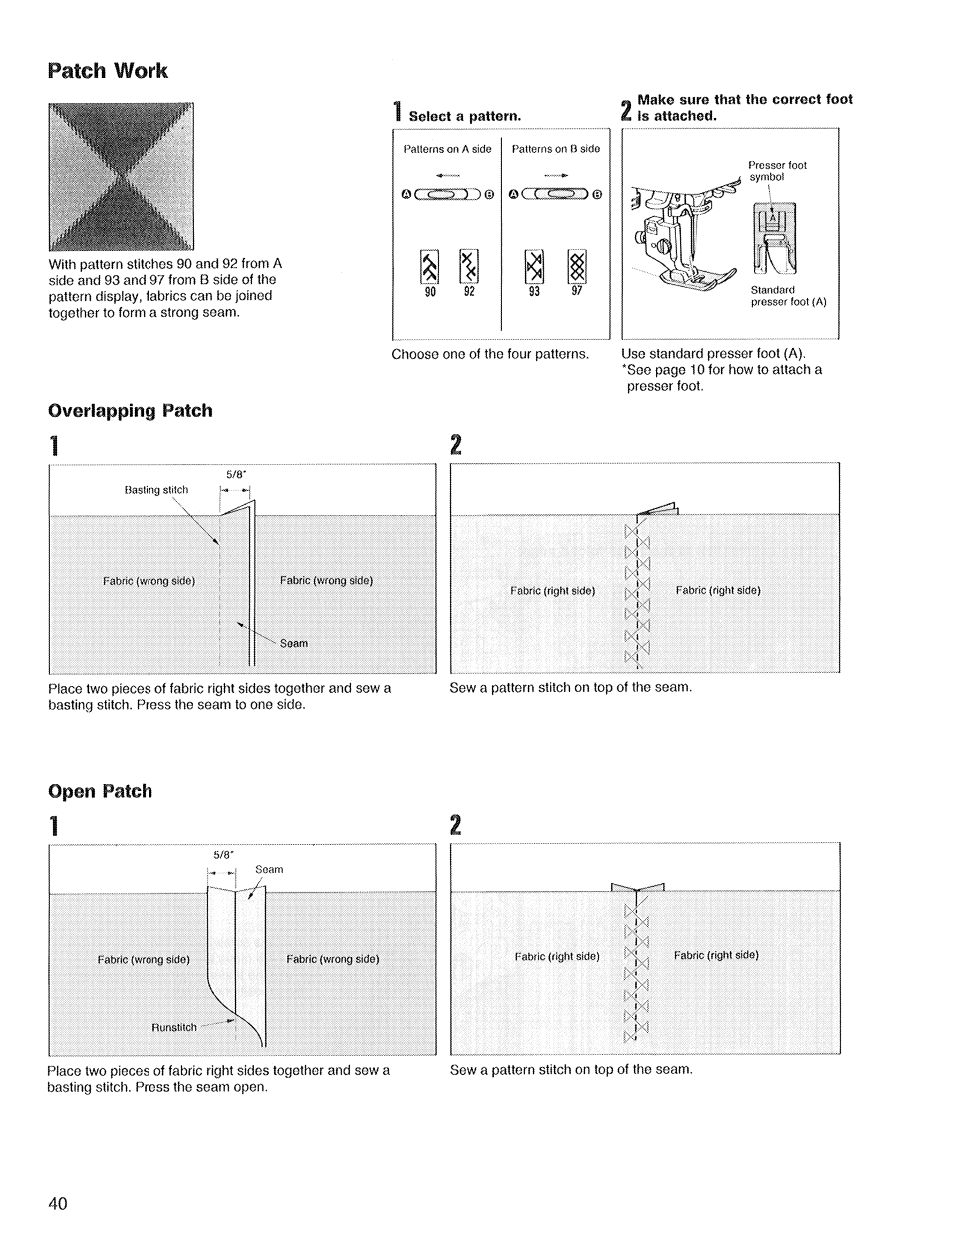 Patch work, Select a pattern, Patchwork | Overlapping patch | SINGER XL1 Quantum User Manual | Page 42 / 48